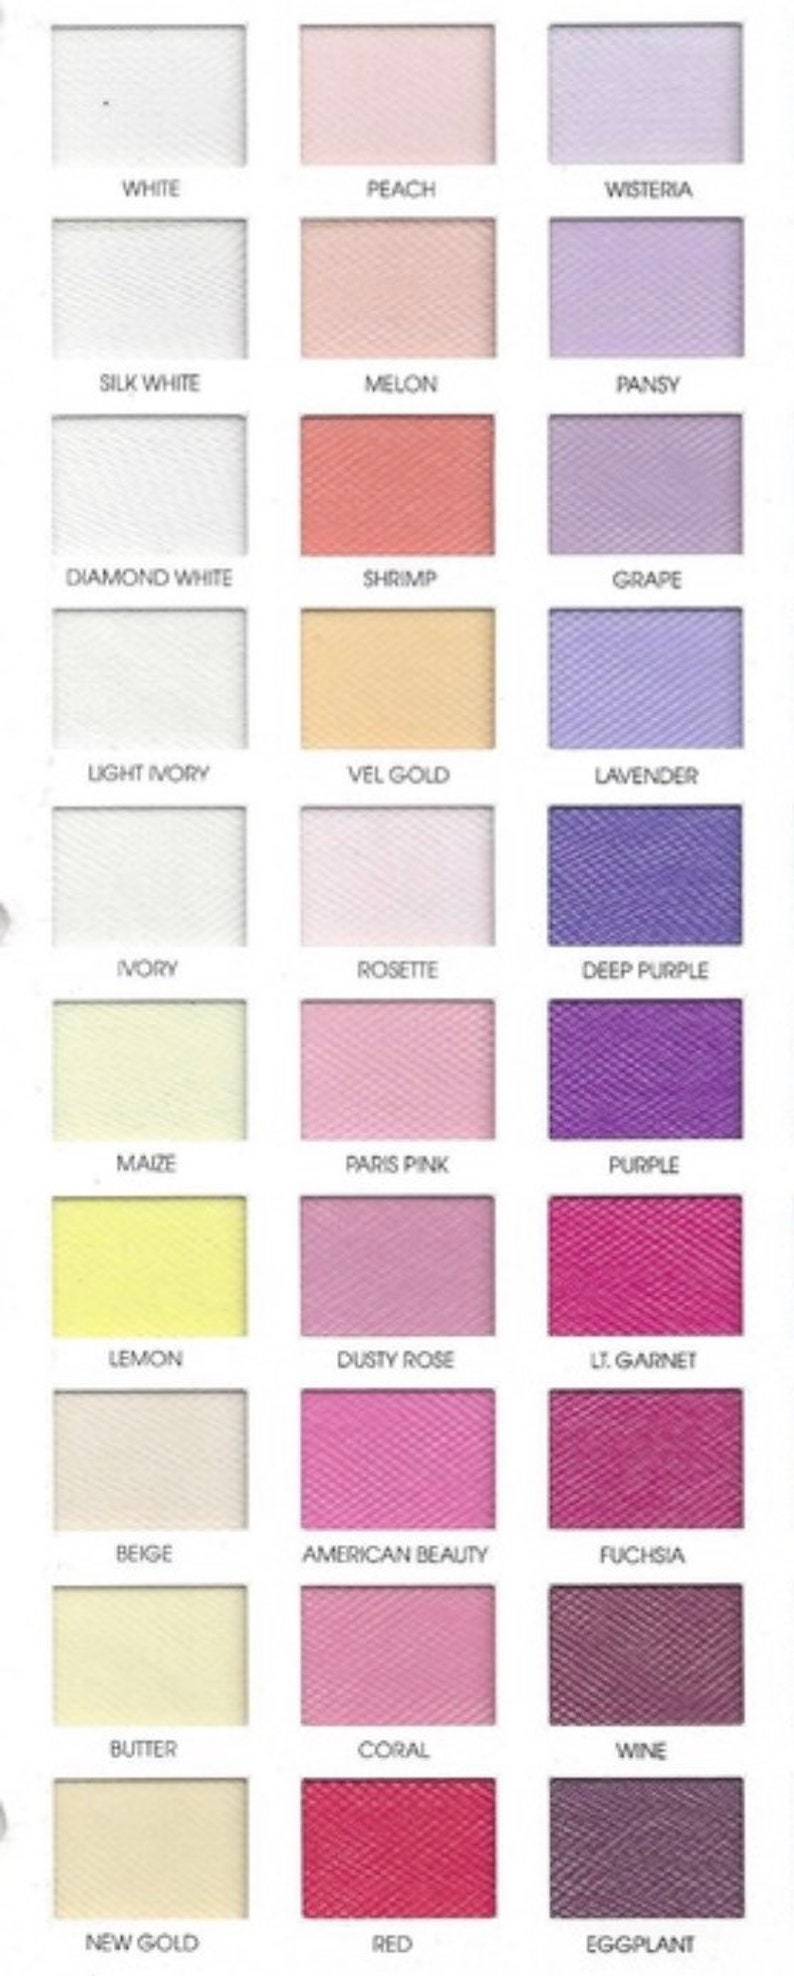 Tulle Fabric-Tulle-Custom Tulle-Netting-Mesh-58 Colors image 2